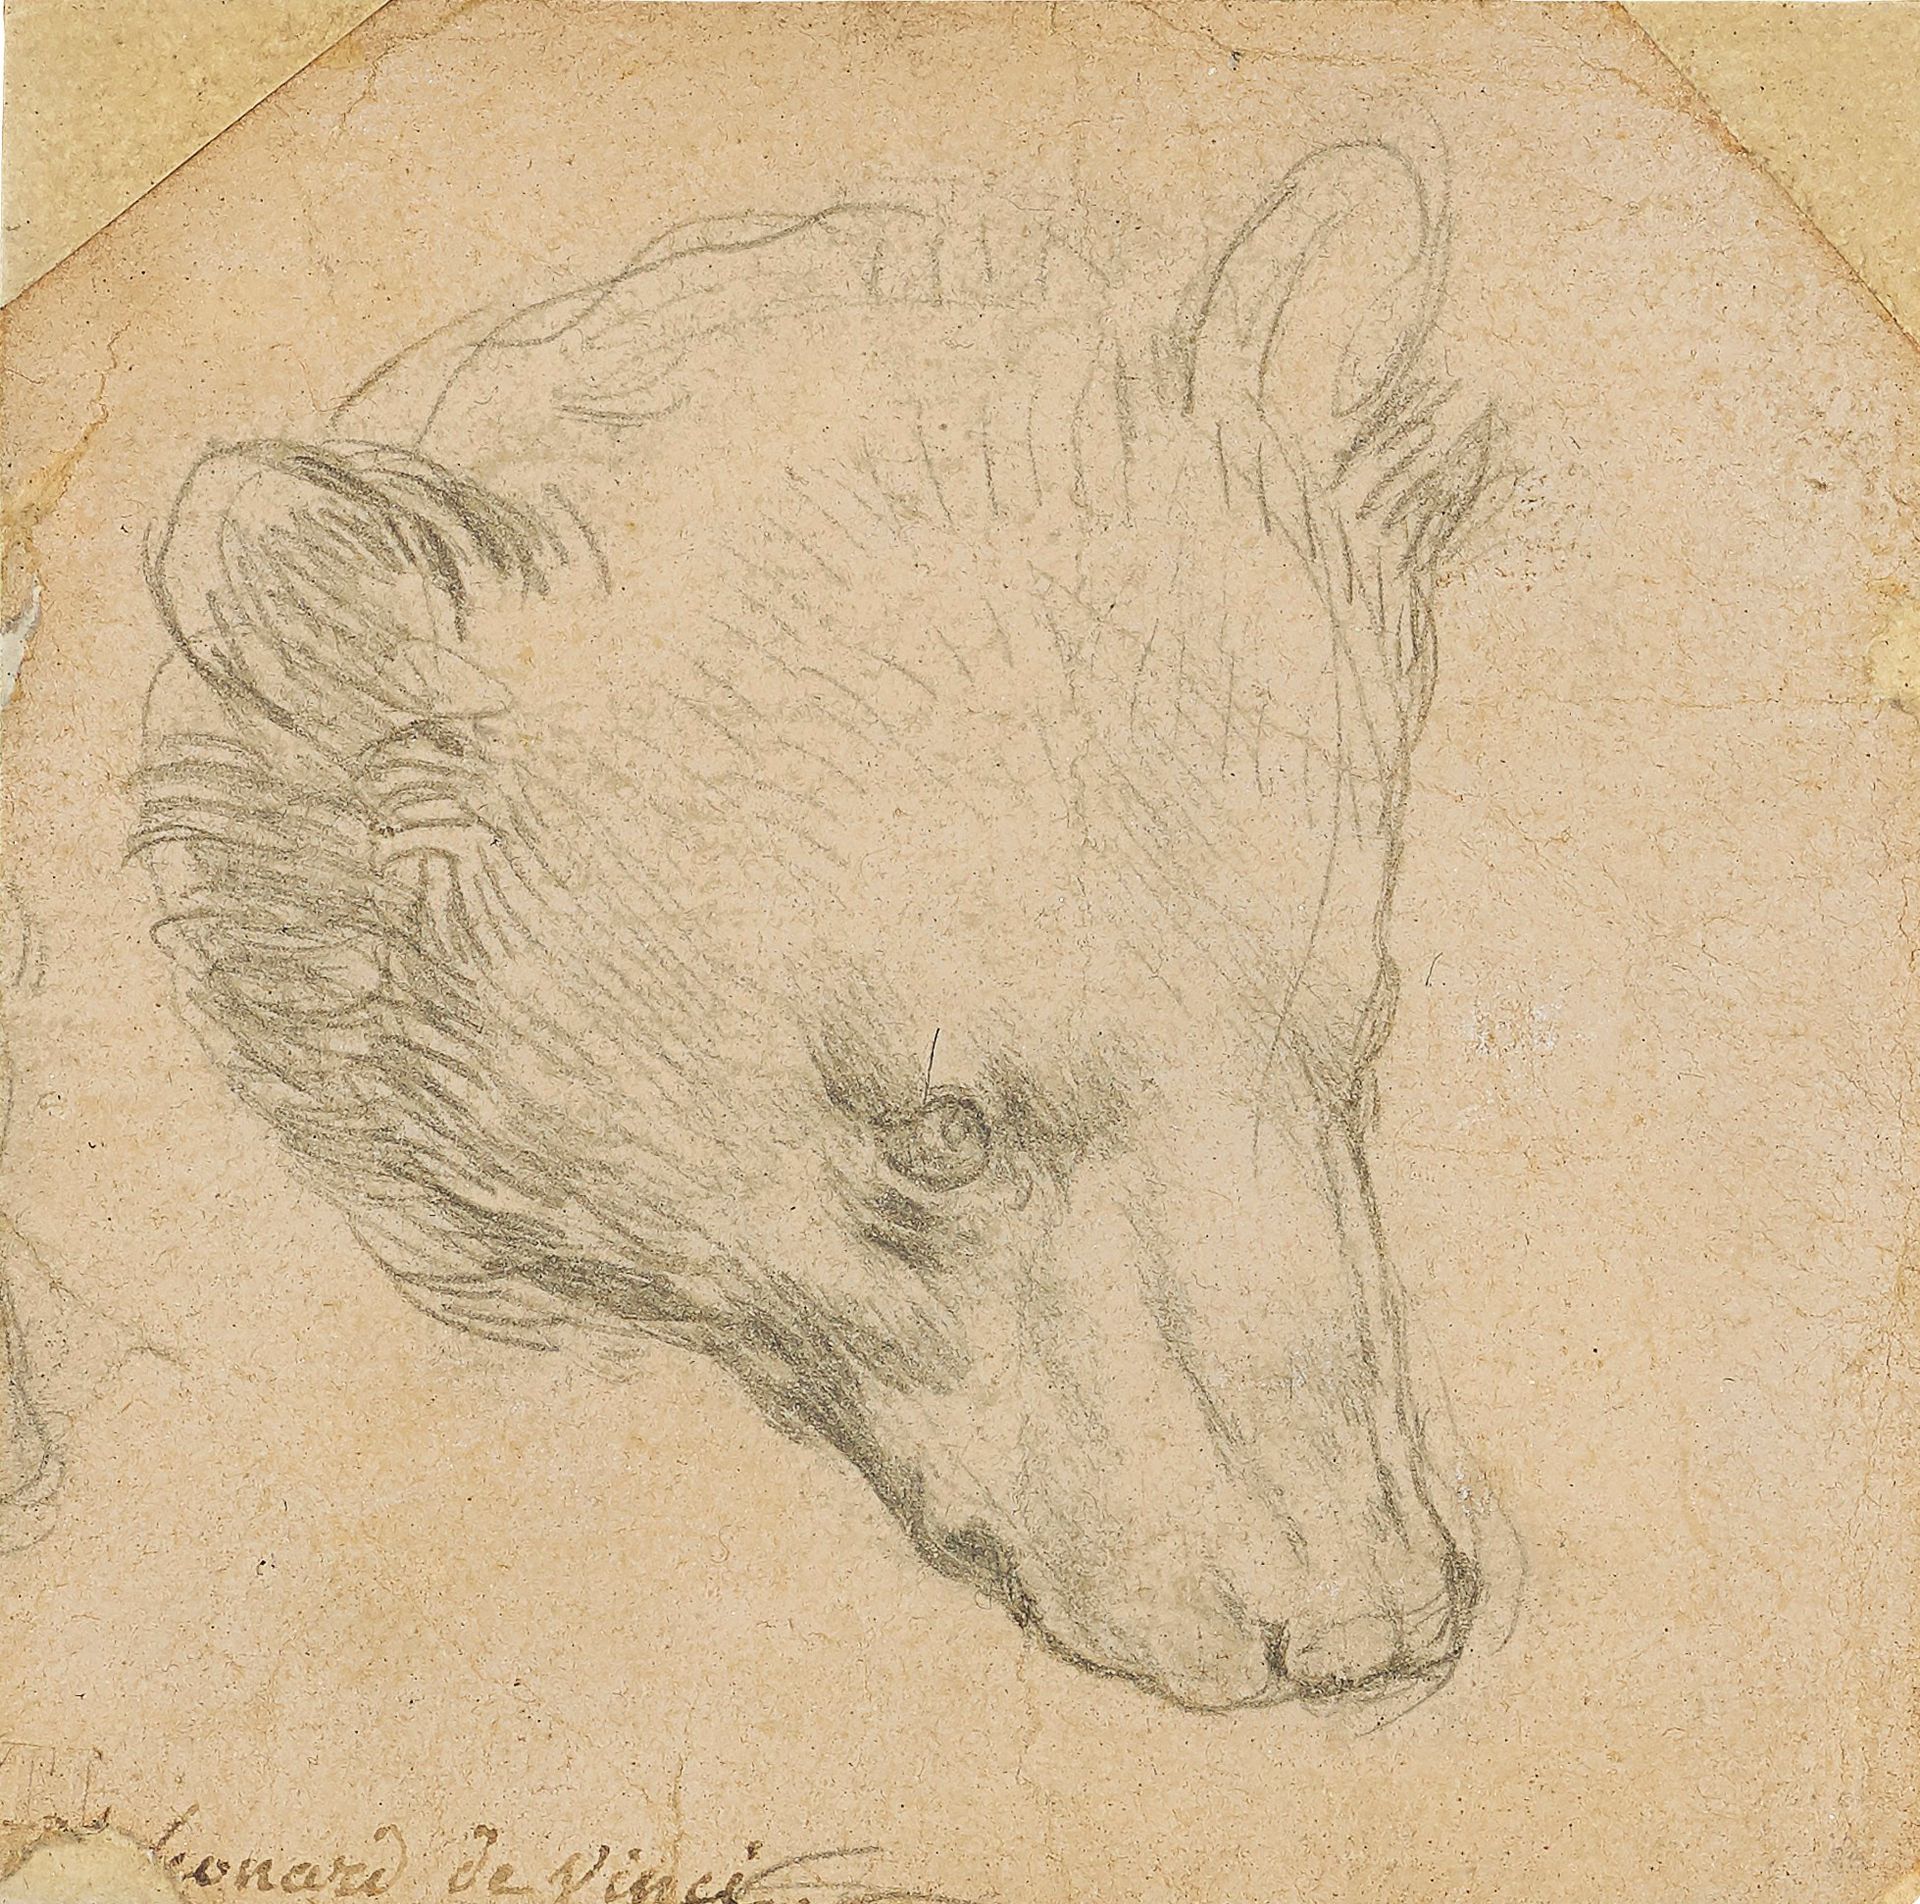 Leonardo da Vinci's Head of a Bear (around 1480) is expected to fetch between £8m to £12m © Christie's